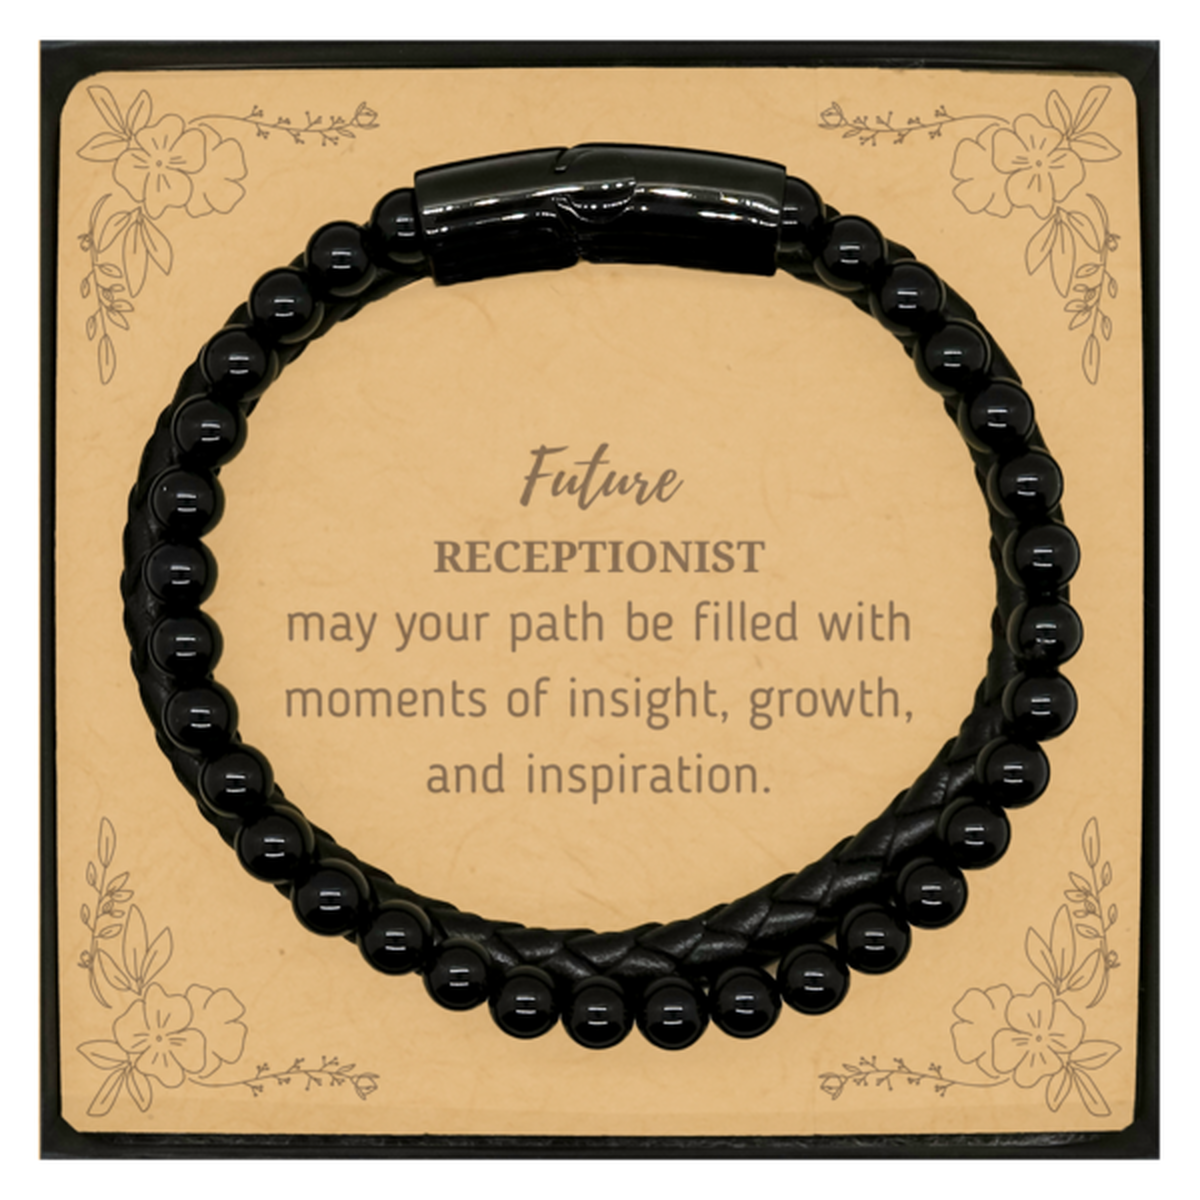 Future Receptionist Gifts, May your path be filled with moments of insight, Graduation Gifts for New Receptionist, Christmas Unique Stone Leather Bracelets For Men, Women, Friends